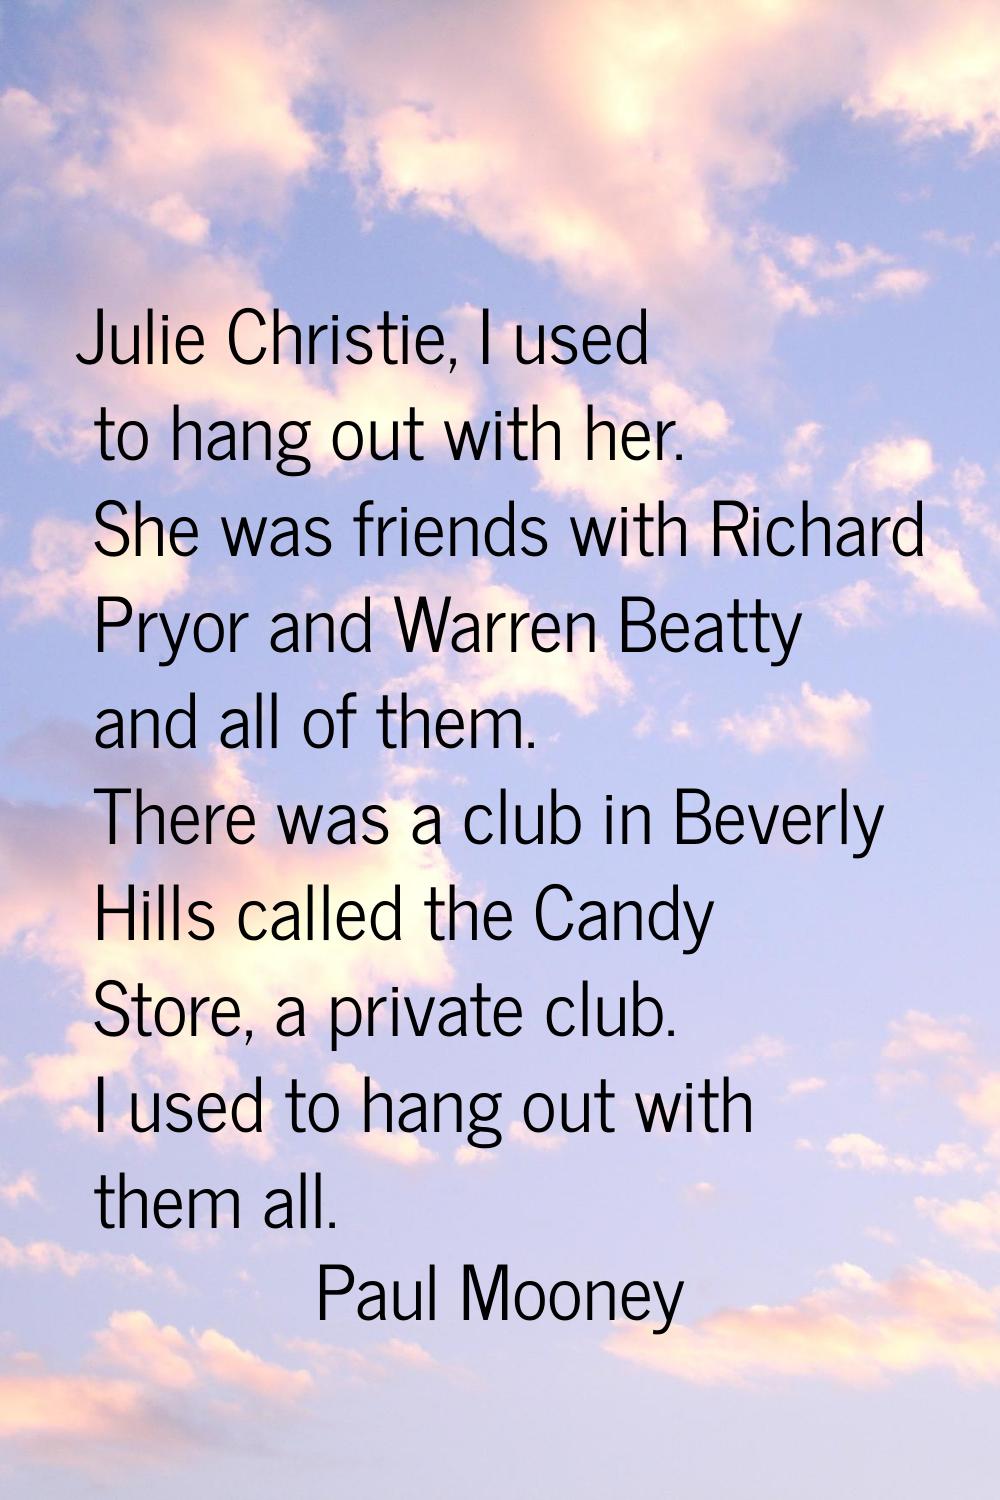 Julie Christie, I used to hang out with her. She was friends with Richard Pryor and Warren Beatty a